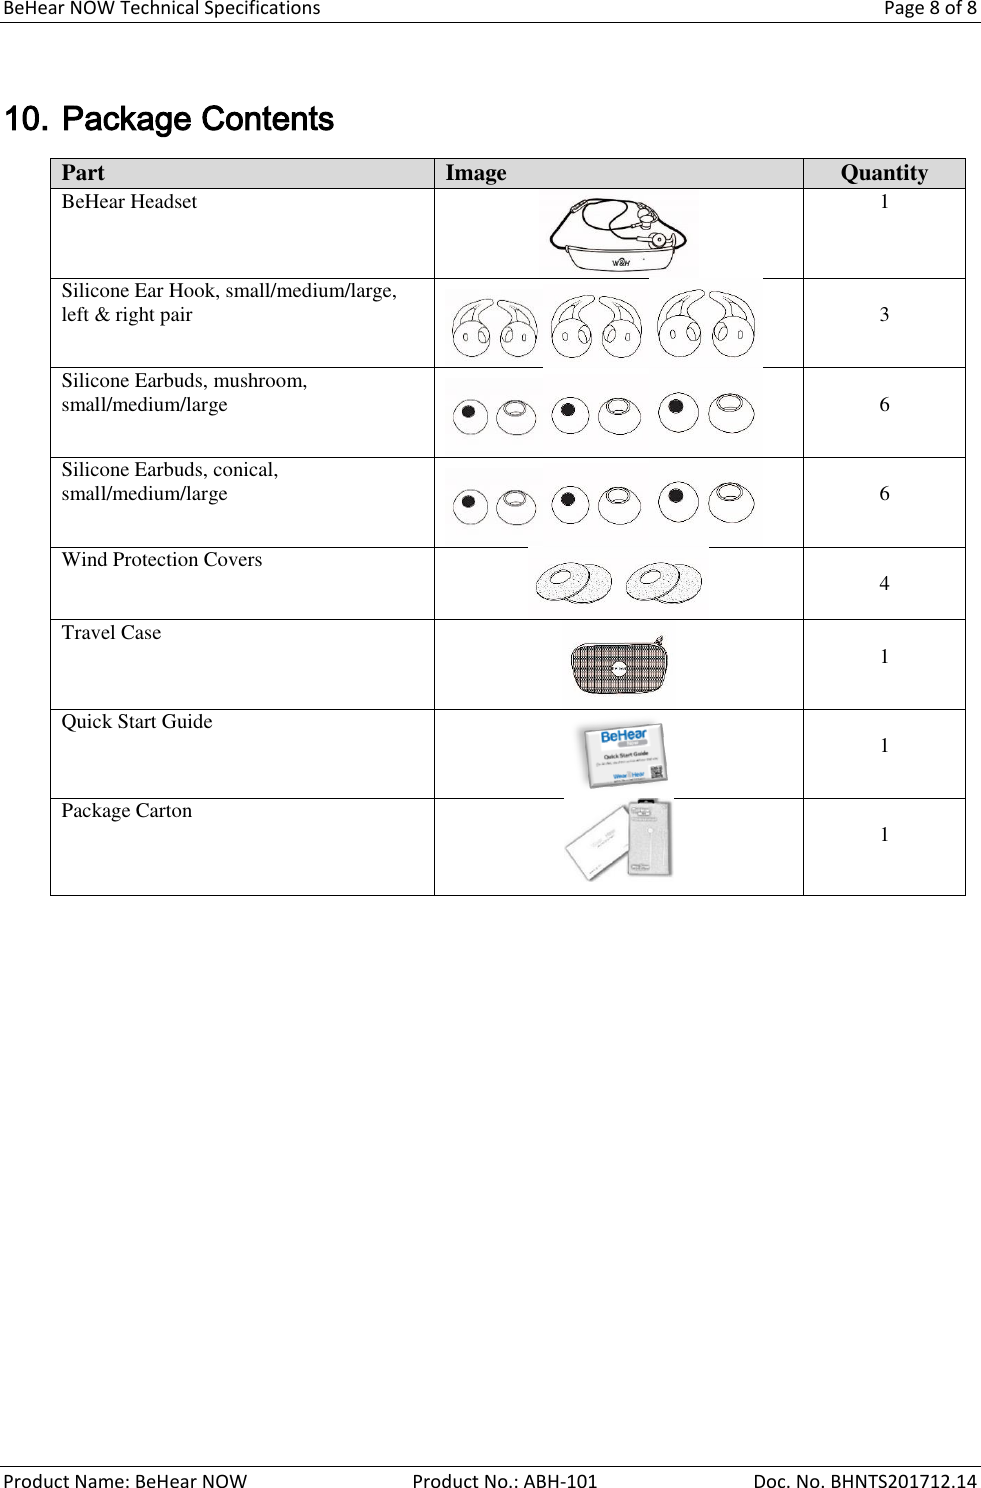 Page 8 of ALANGO TECHNOLOGIES ABH-101 Bluetooth Headset User Manual BeHear NOW Technical Specifications